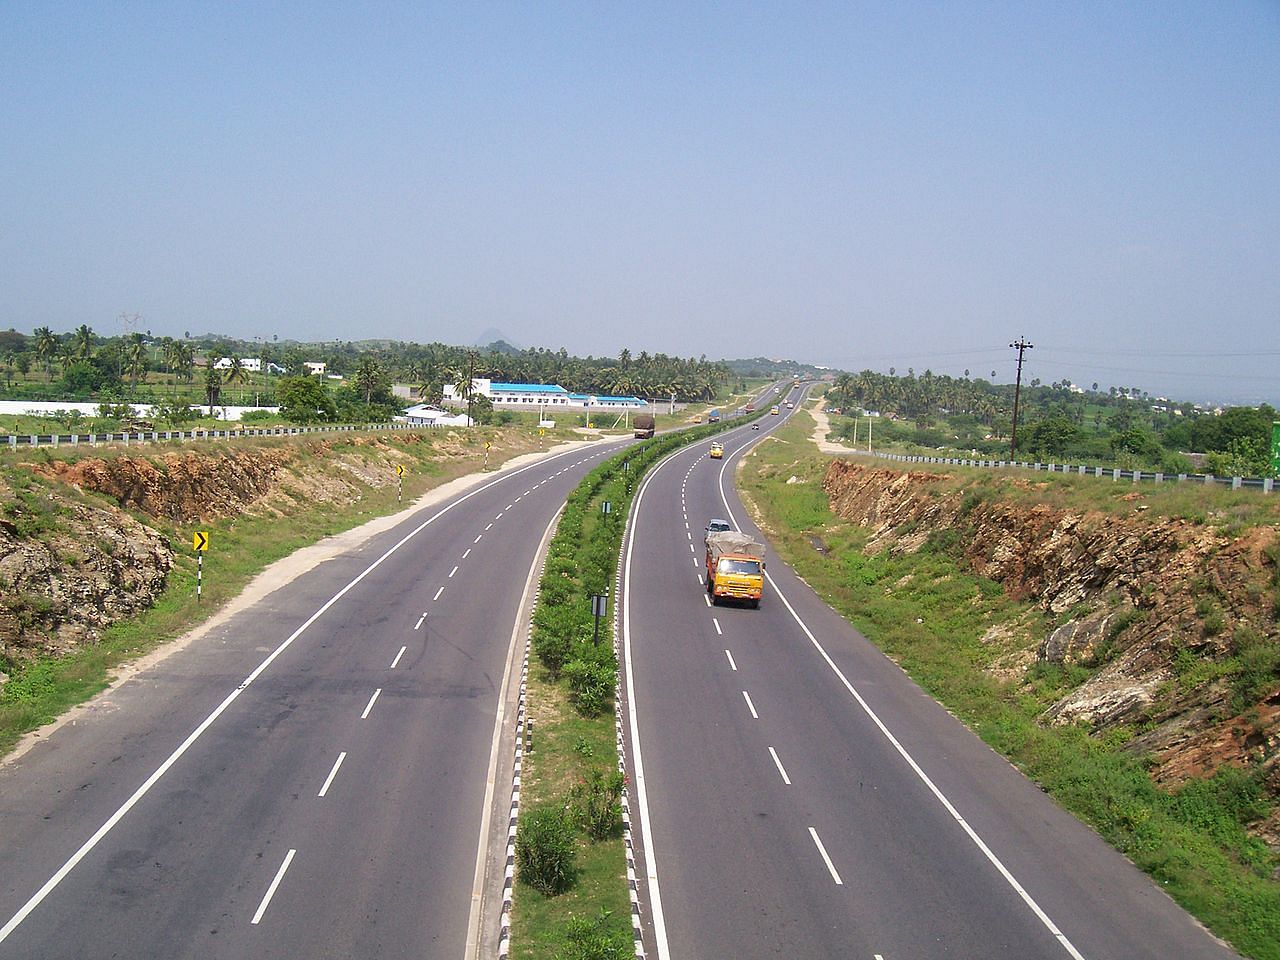 IndiaRF Announces USD 75million (INR 555 crs) Investment in Thrissur Expressway Ltd.